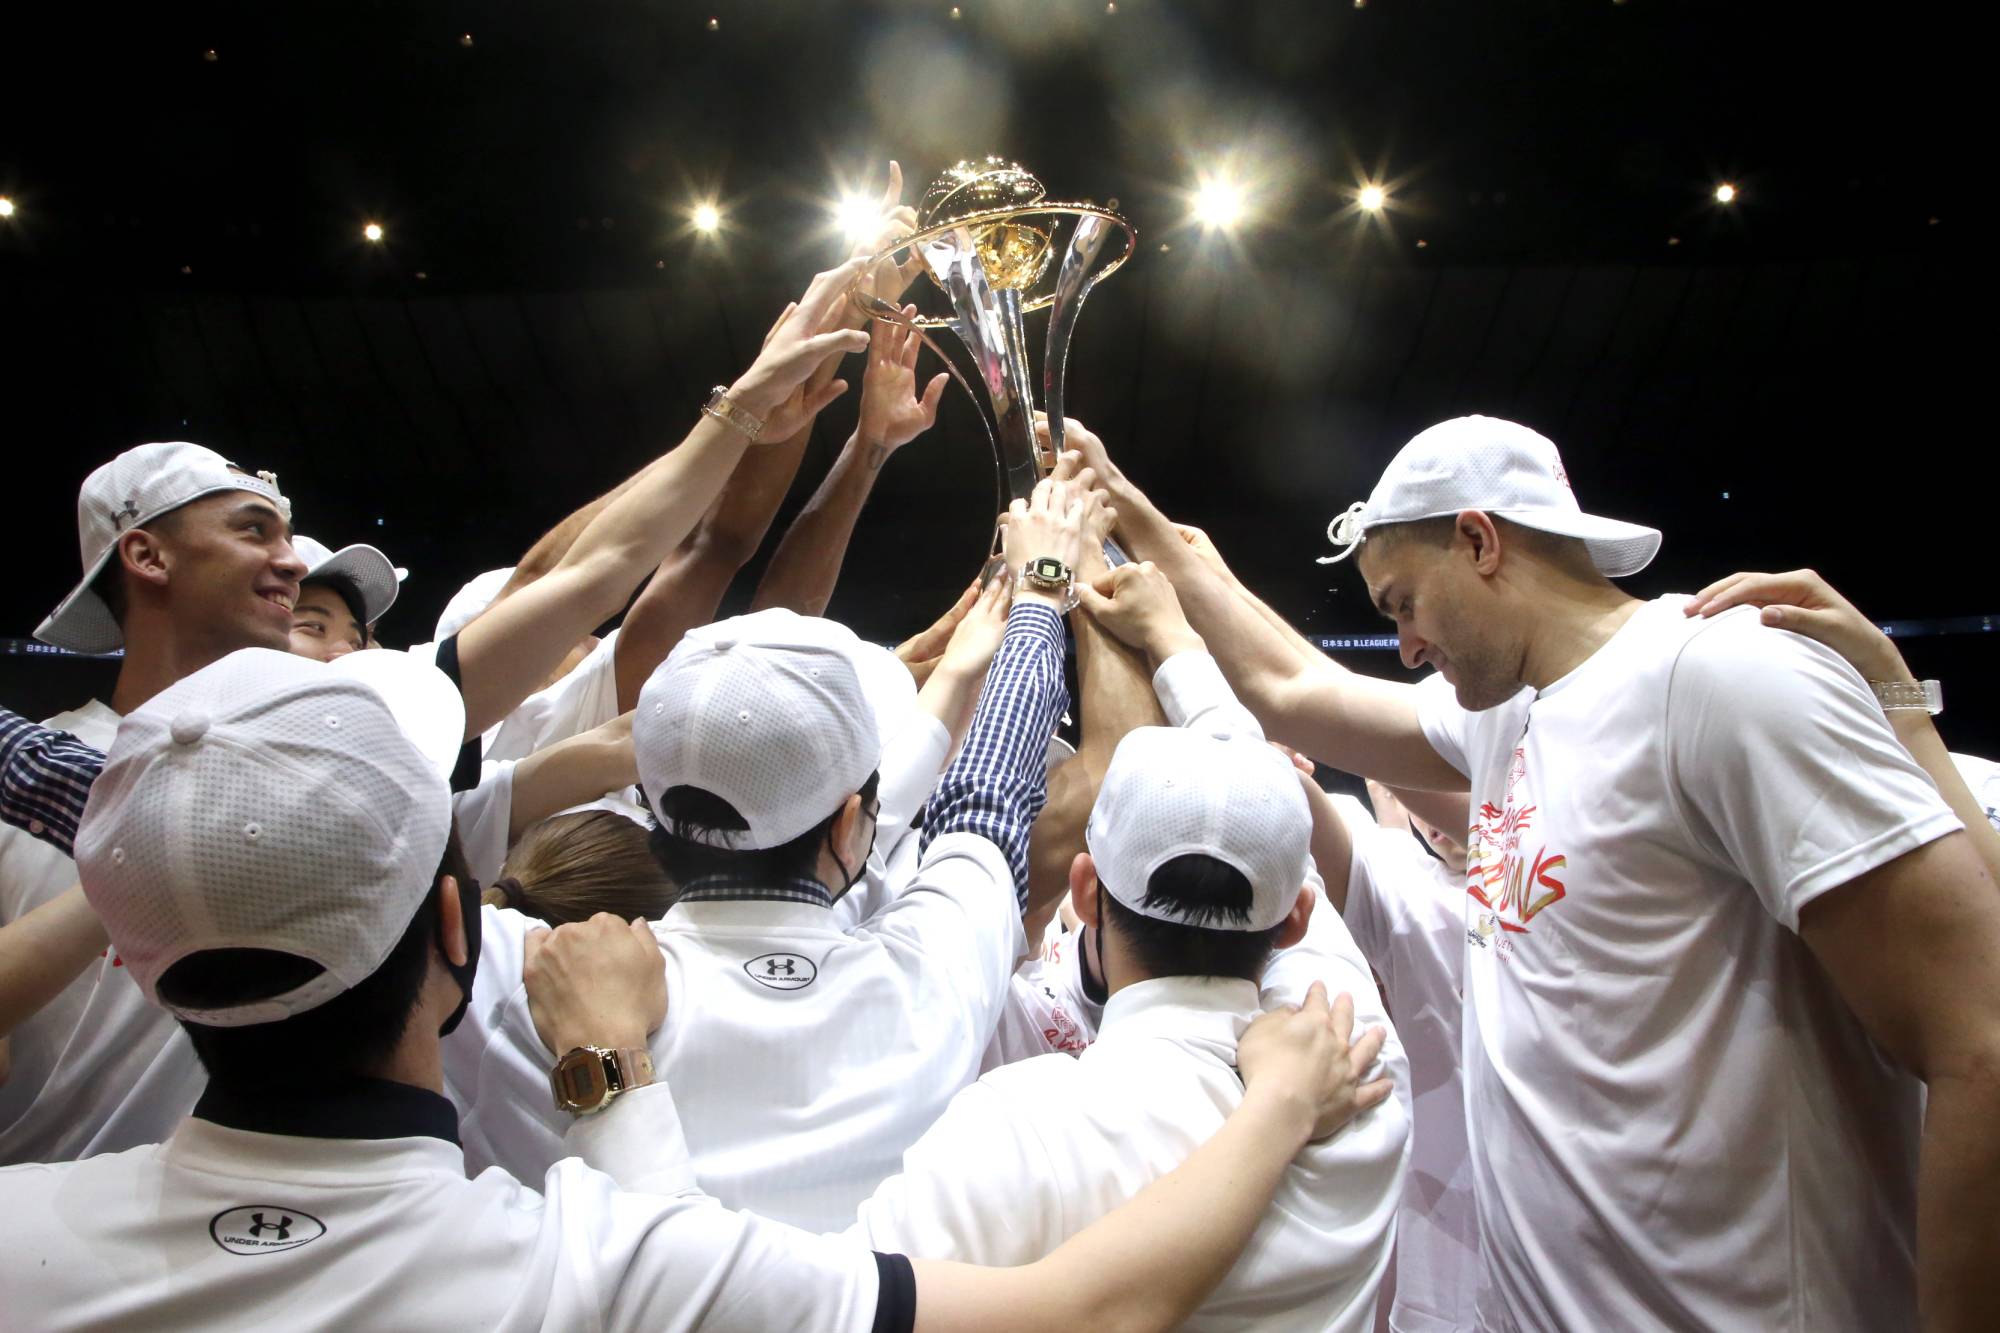 The B. League champion Chiba Jets Funabashi led their top-division rivals with 280,000 combined followers on their main social media platforms. | B. LEAGUE